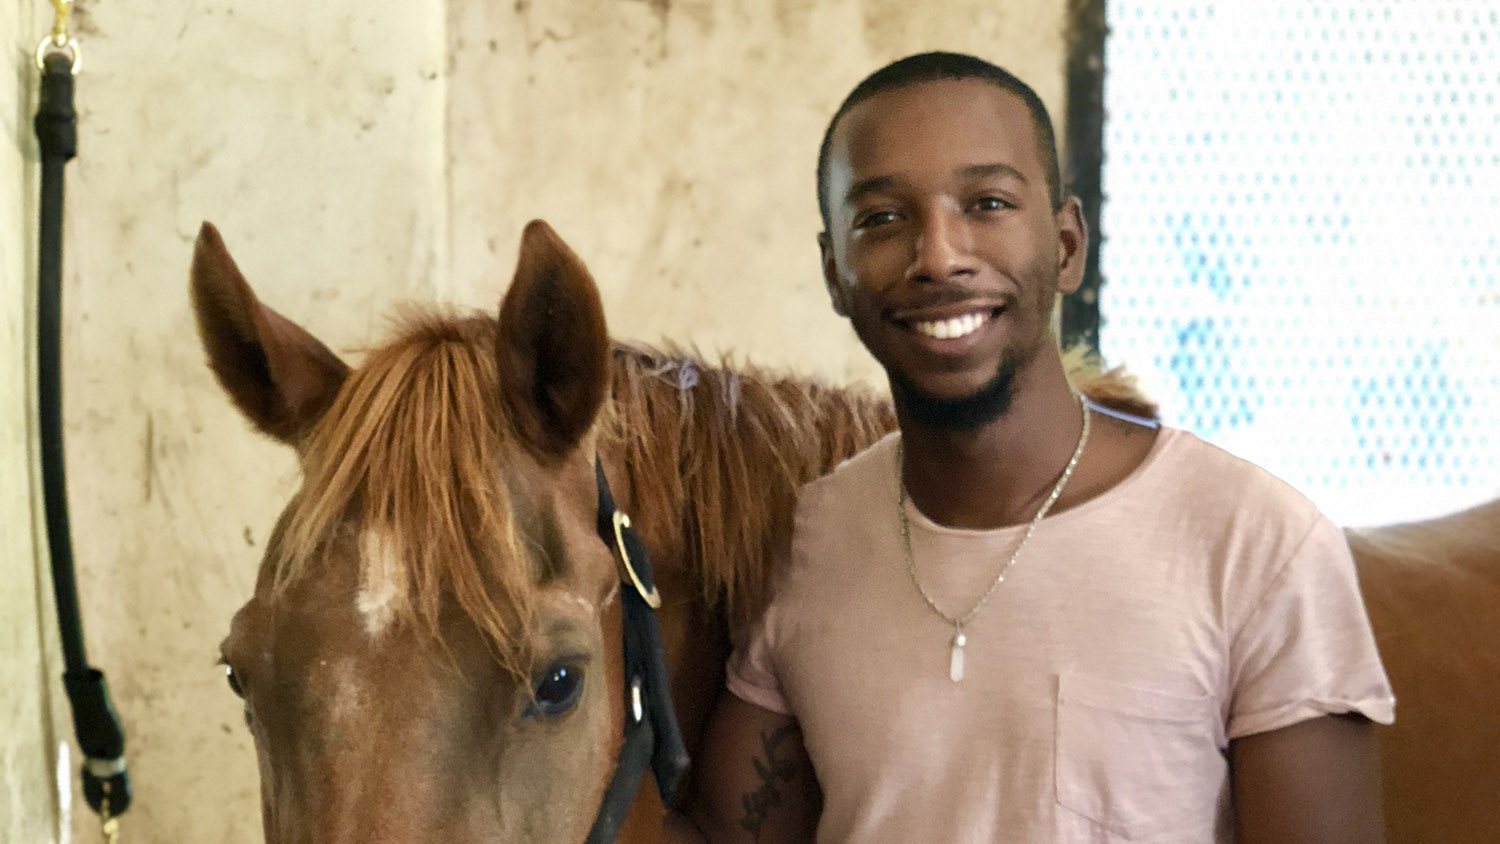 CALS Animal Science alumnus James Quick stands next to a horse.